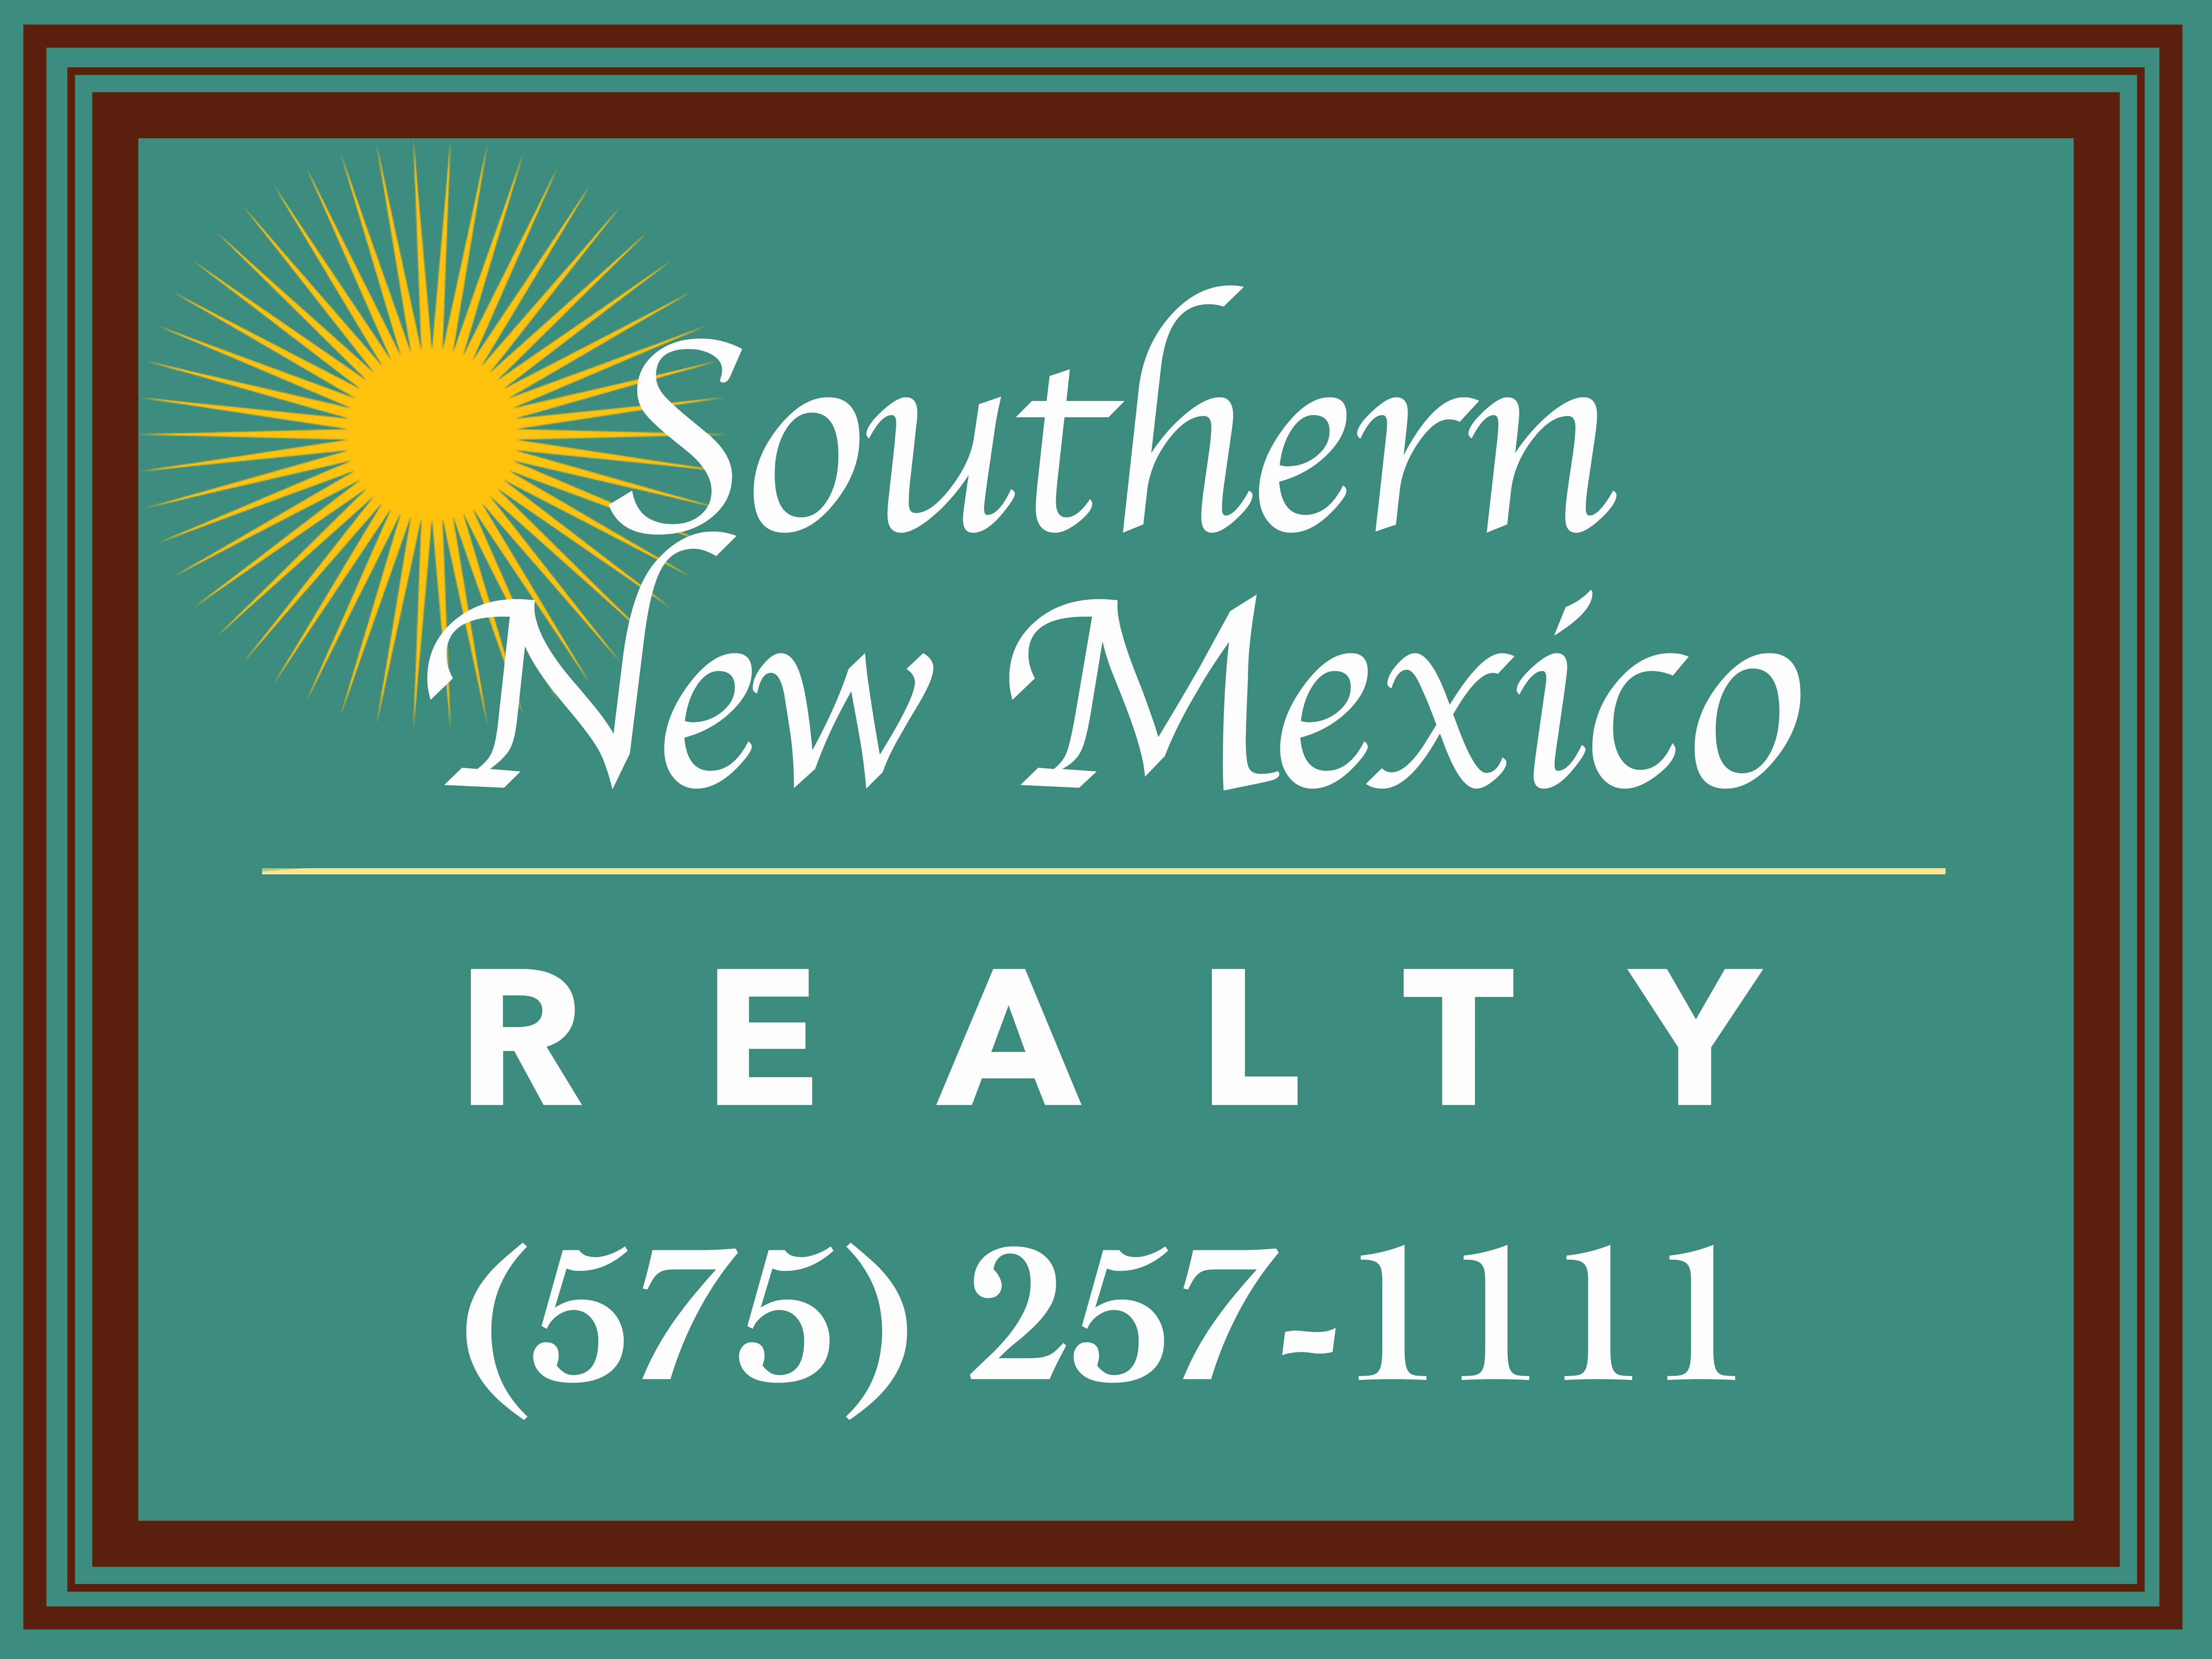 Southern New Mexico Realty